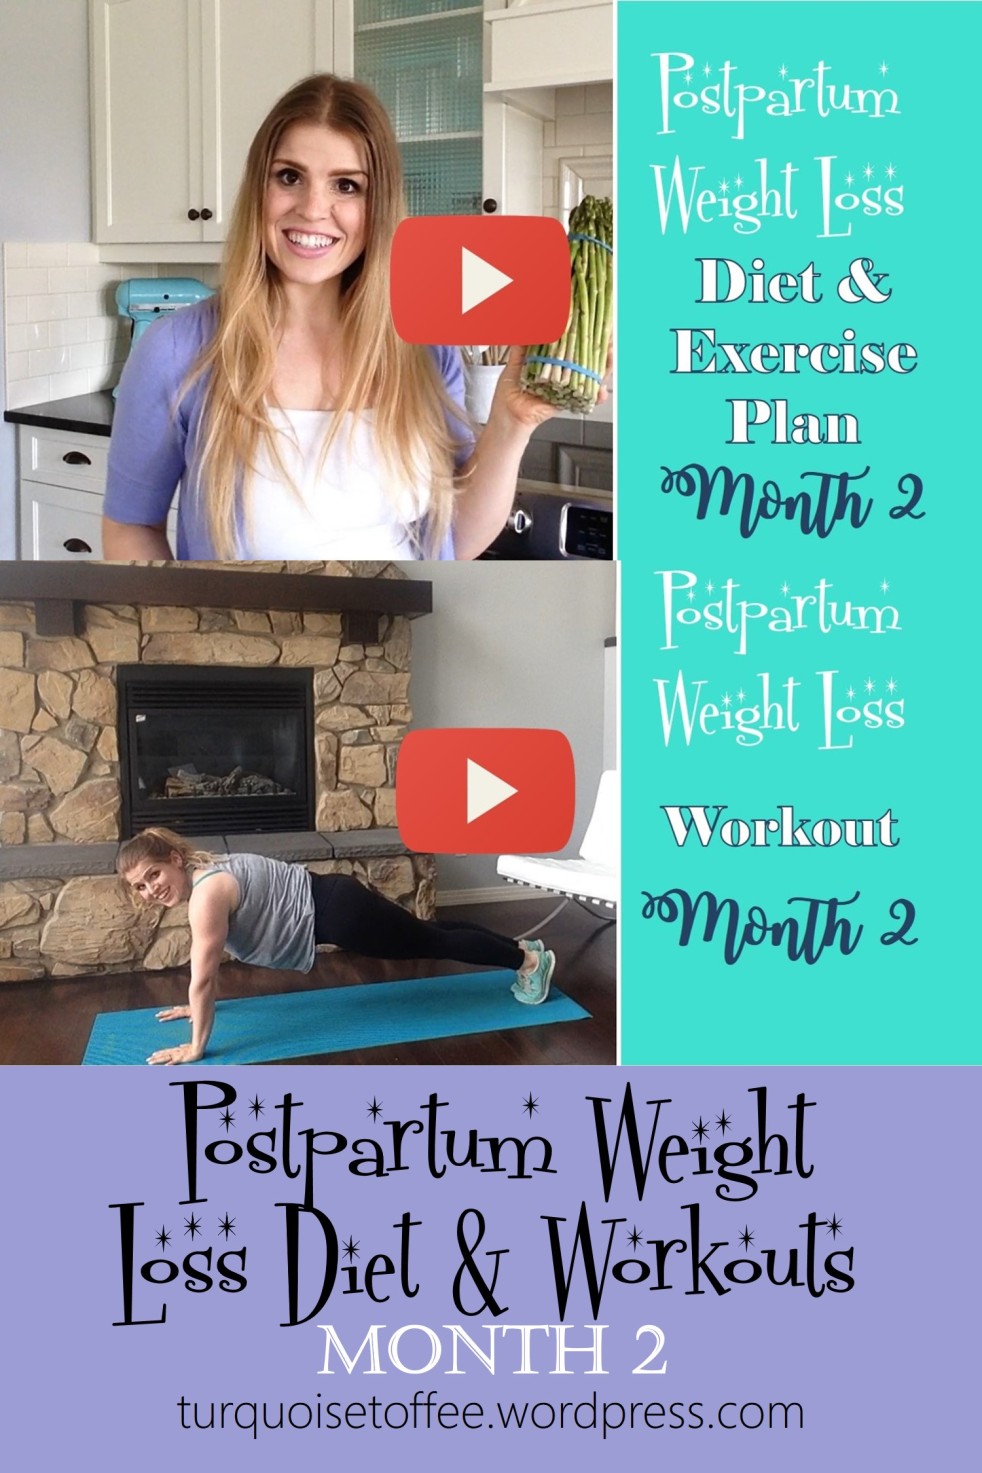 Postpartum Weight Loss Workouts Month 2